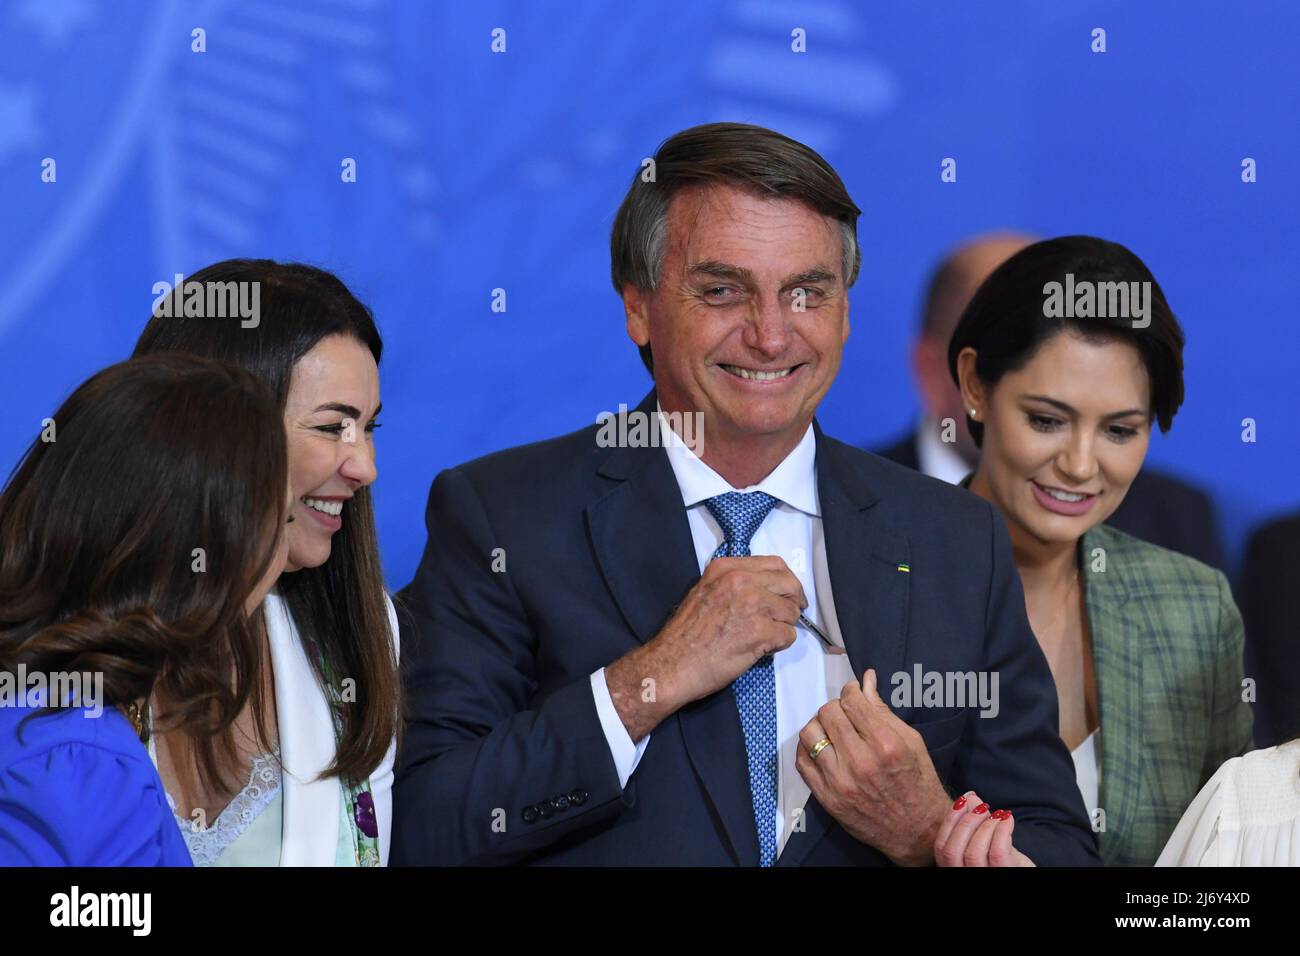 DF - Brasilia - 05/04/2022 - BRASILIA, DELIVERIES OF THE INCOME AND OPPORTUNITY PROGRAM - The President of the Republic, Jair Bolsonaro, accompanied by the first lady, Michelle Bolsonaro, during Ceremony of New Deliveries of the Income and Opportunity Program this Wednesday , May 04 . Photo: Mateus Bonomi/AGIF/Sipa USA Stock Photo